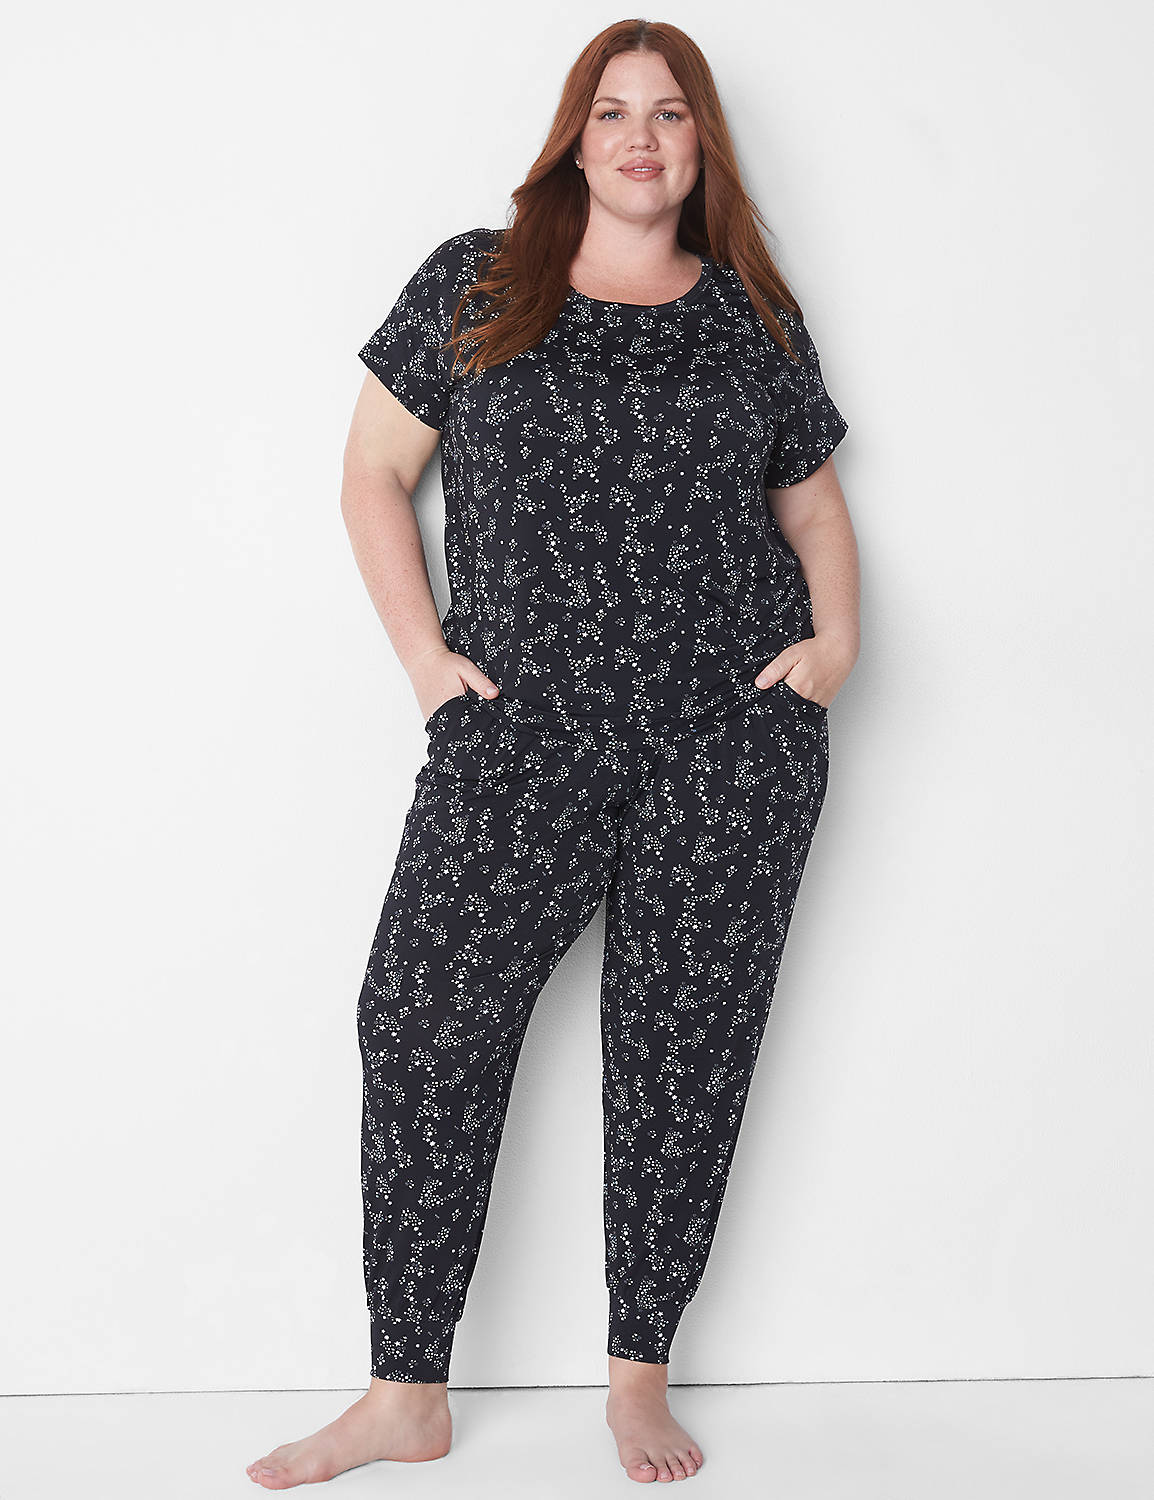 DreamyCool Top and Jogger PJ Set 11 Product Image 1